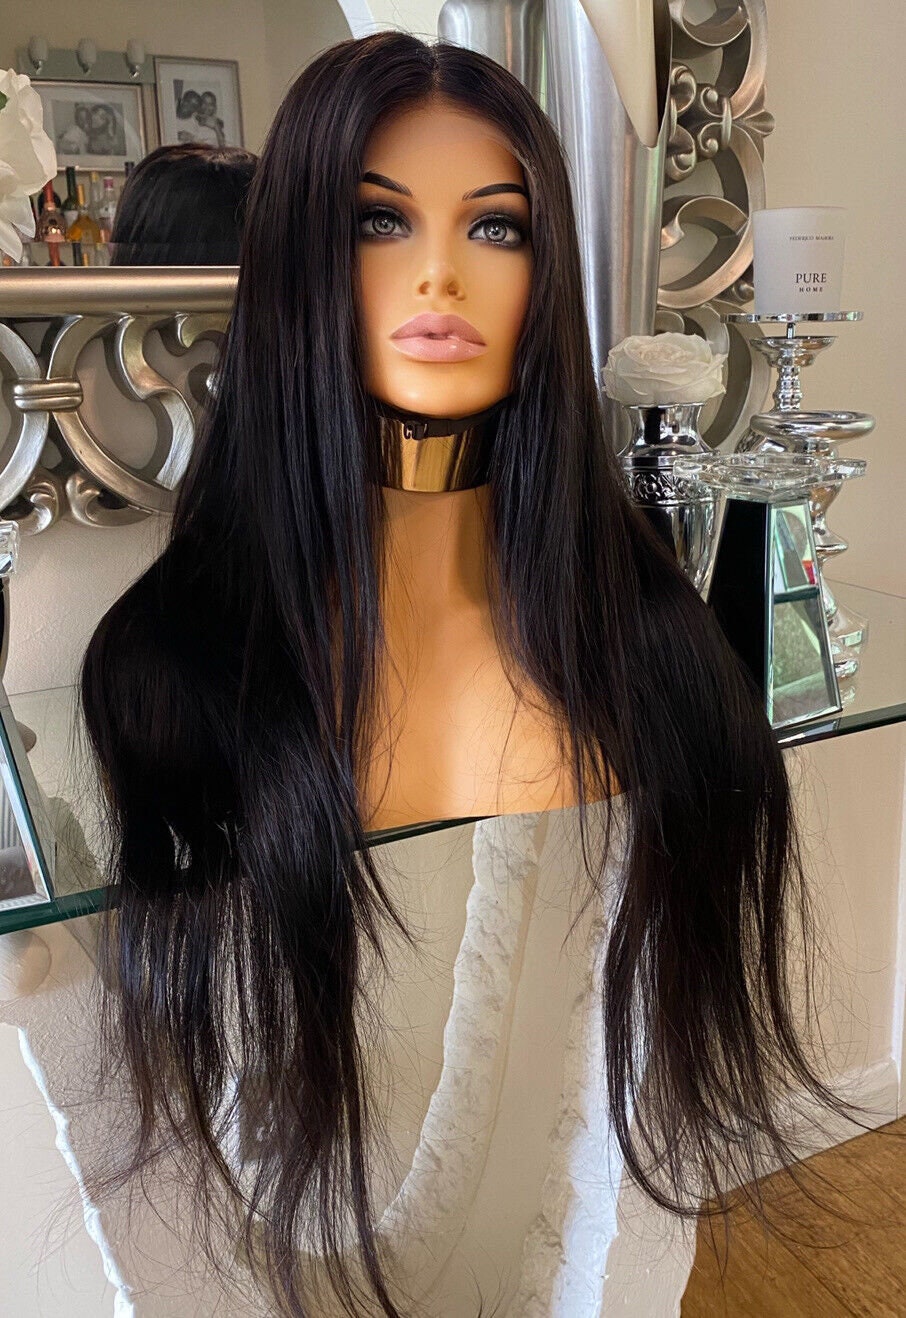 Buy Sale Human Hair Online In India - Etsy India